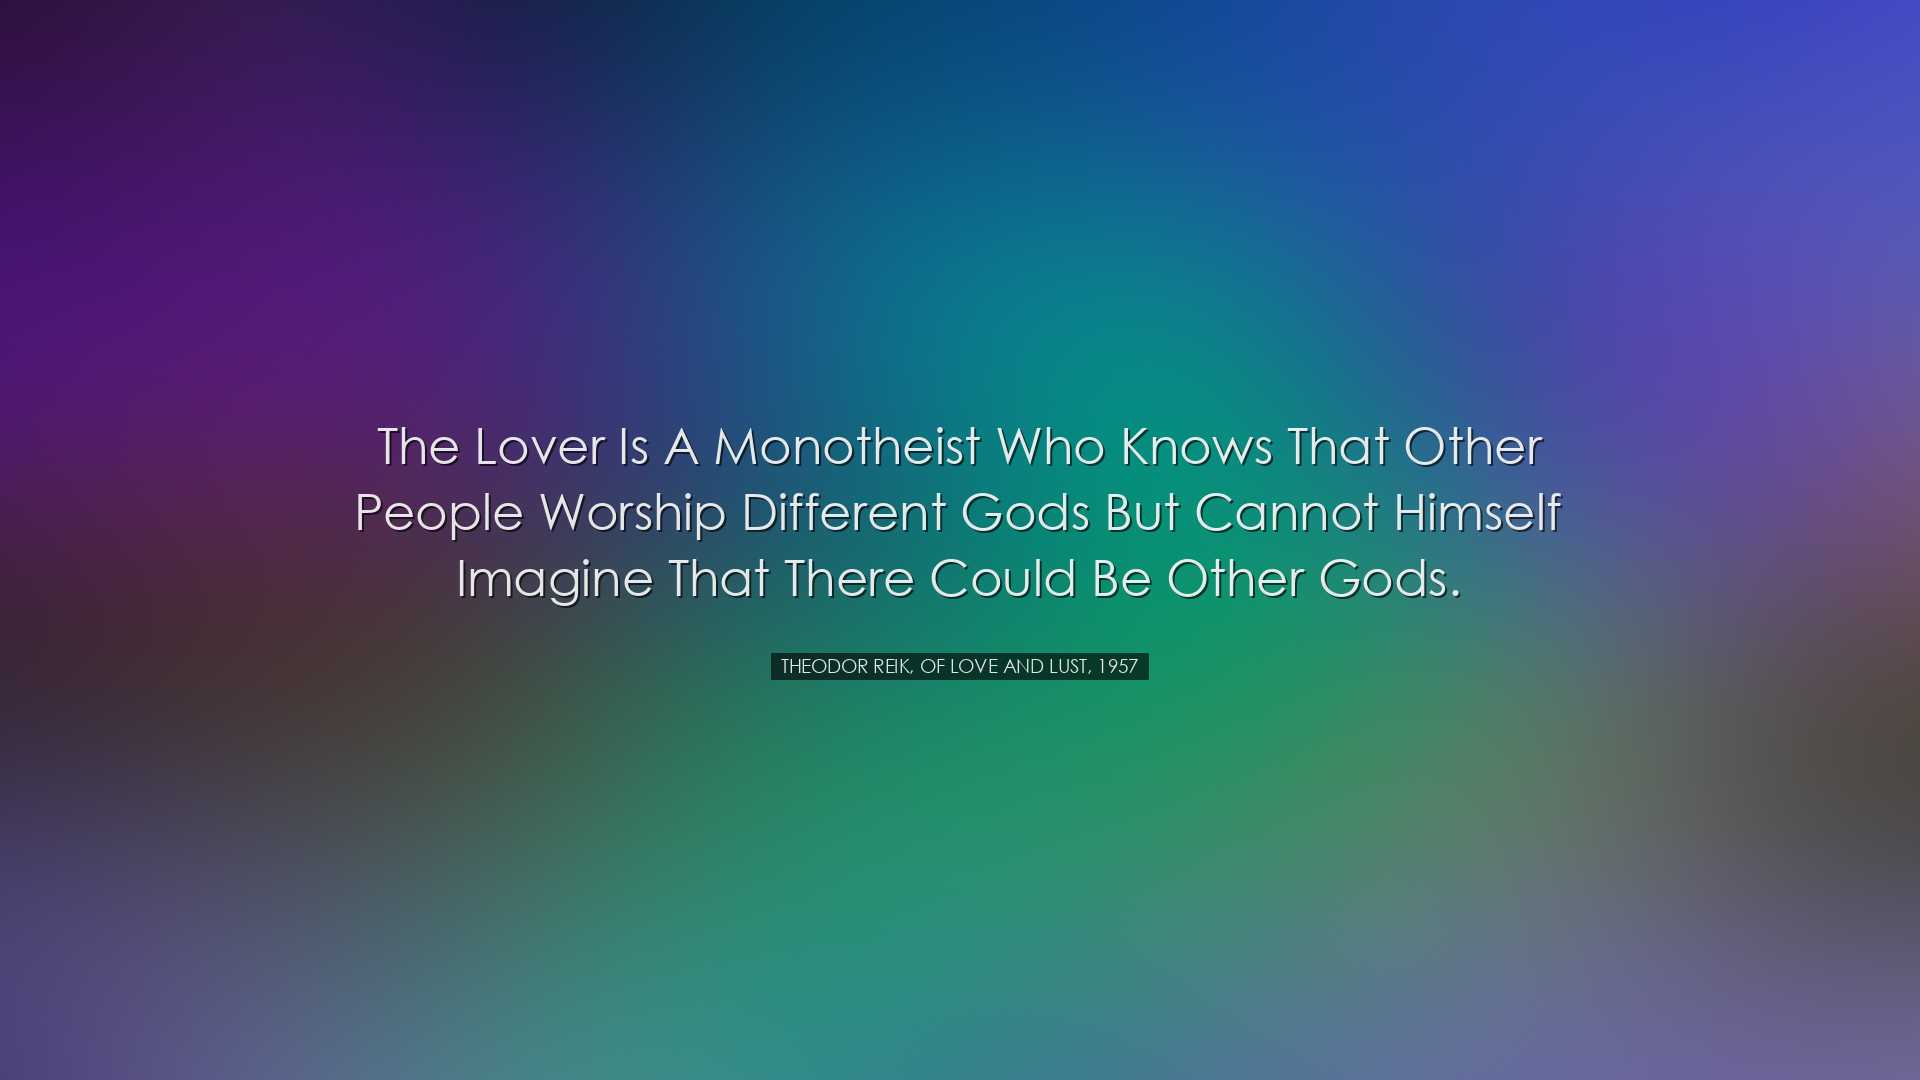 The lover is a monotheist who knows that other people worship diff